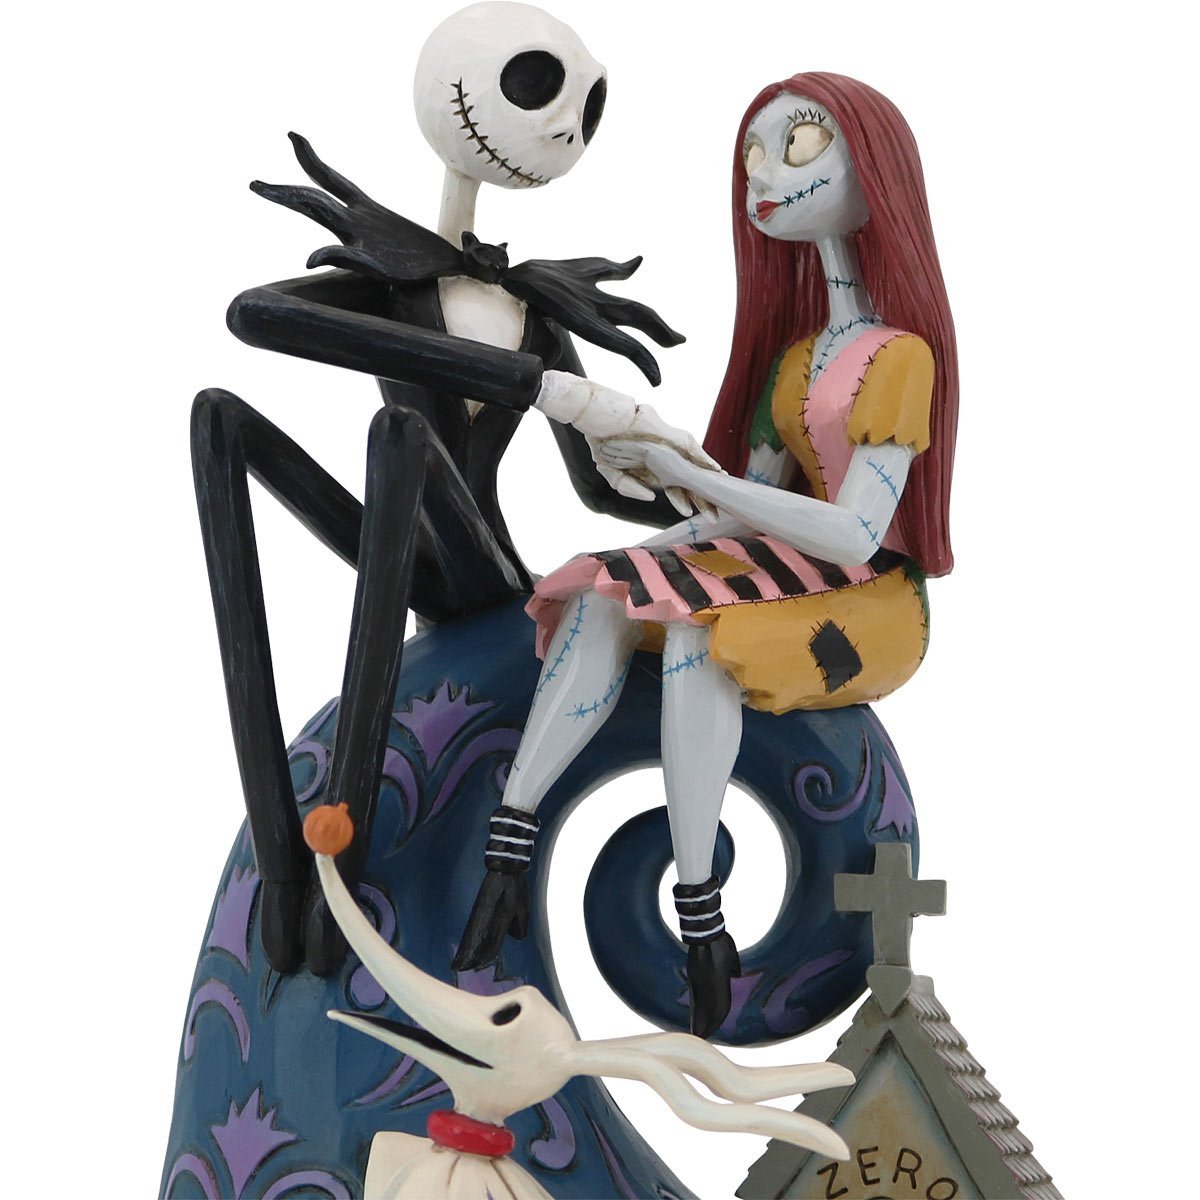 Disney Traditions The Nightmare Before Christmas Jack, Sally, and